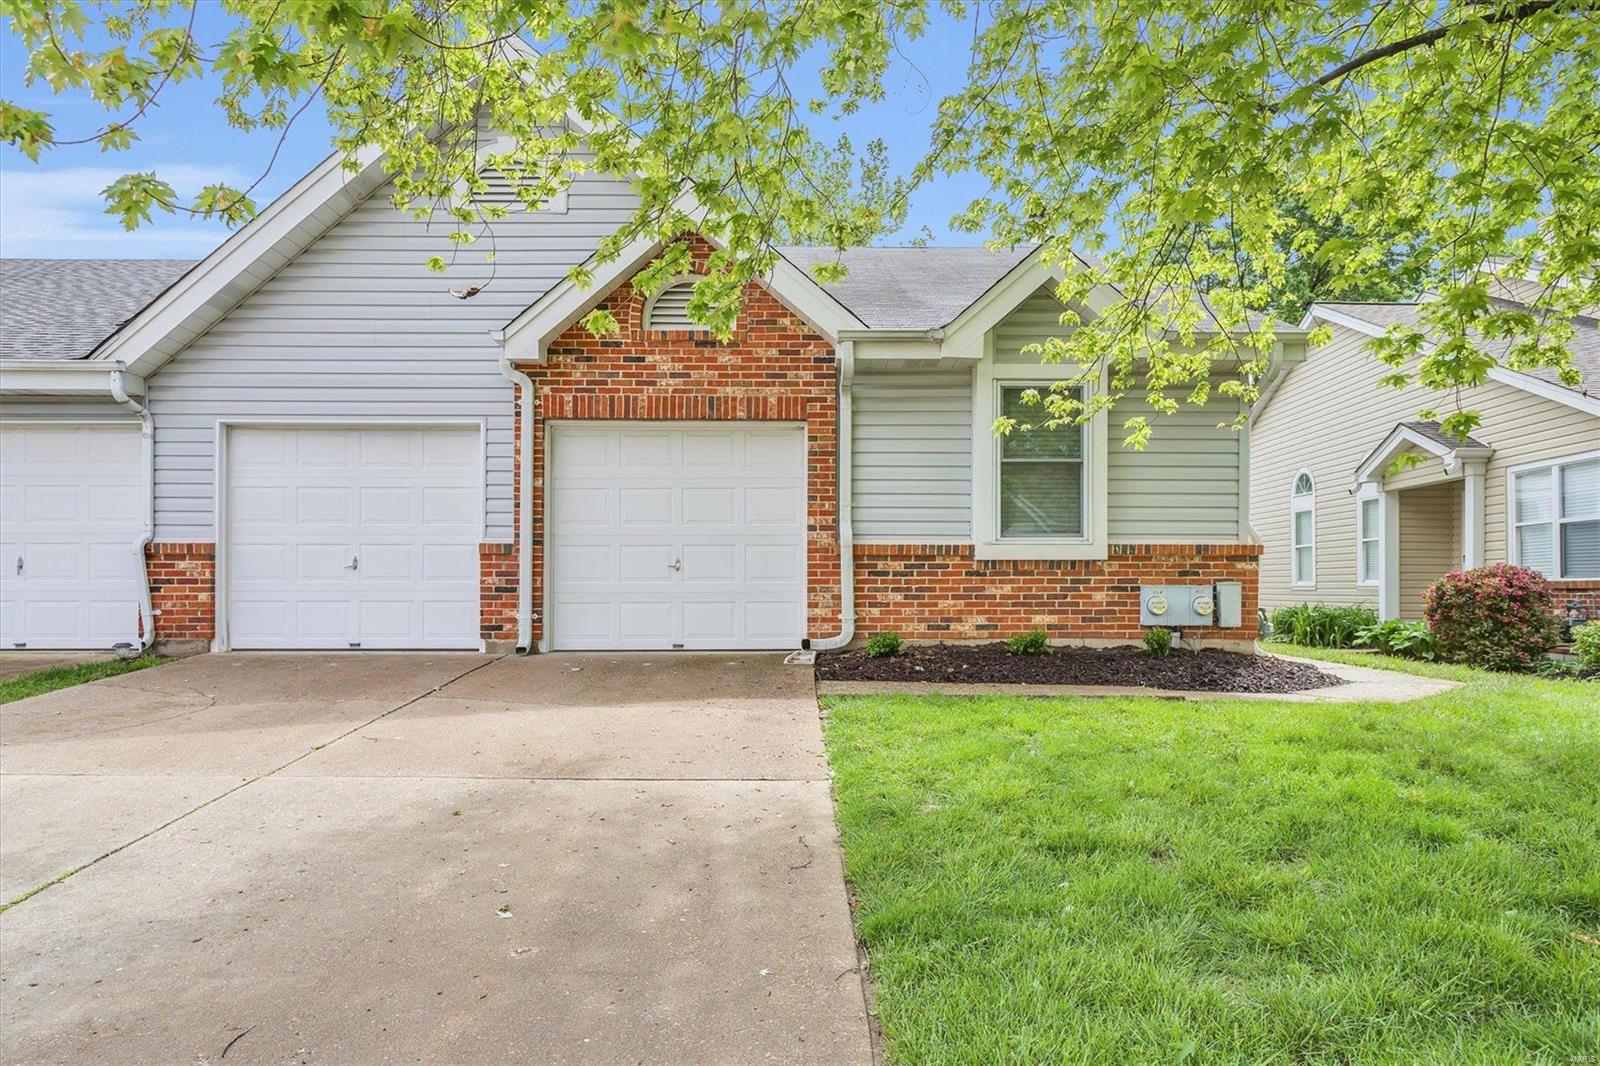 View St Peters, MO 63376 townhome